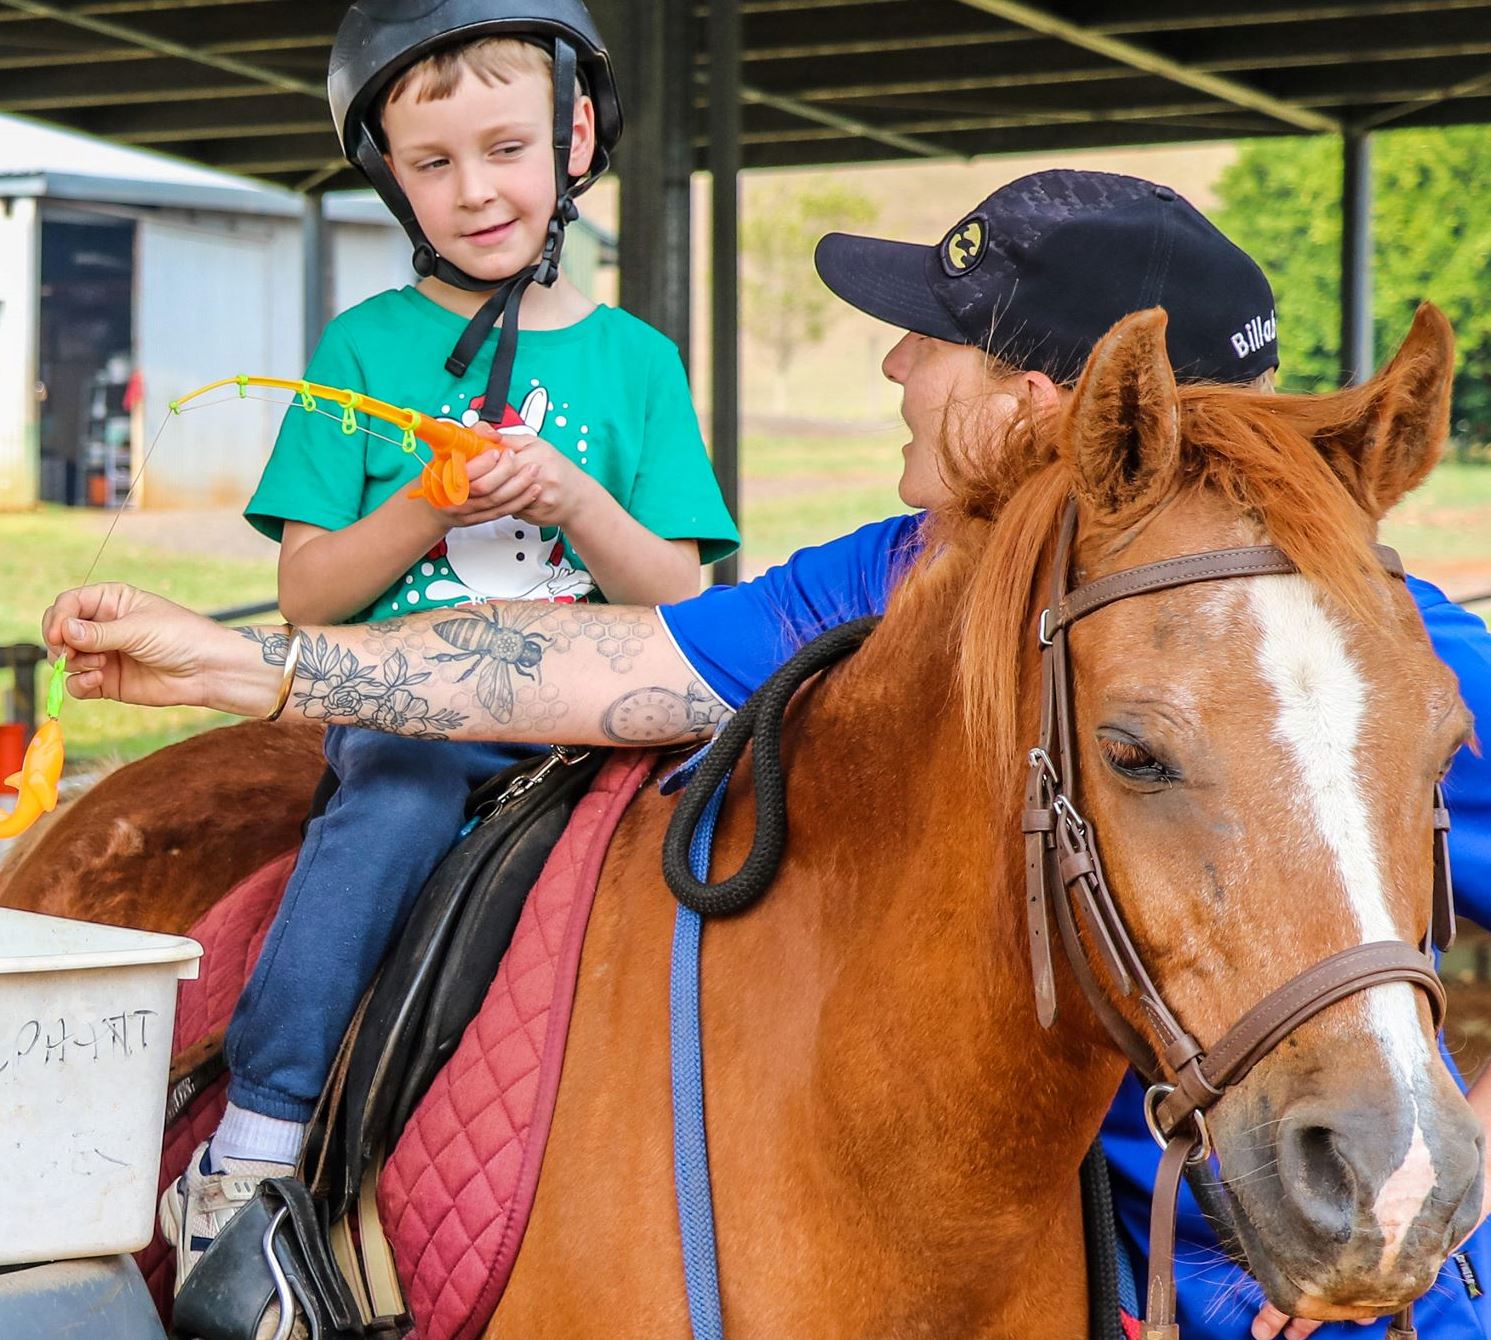 Young disabled boy and volunteer, learning skills and activities surrounding horses.